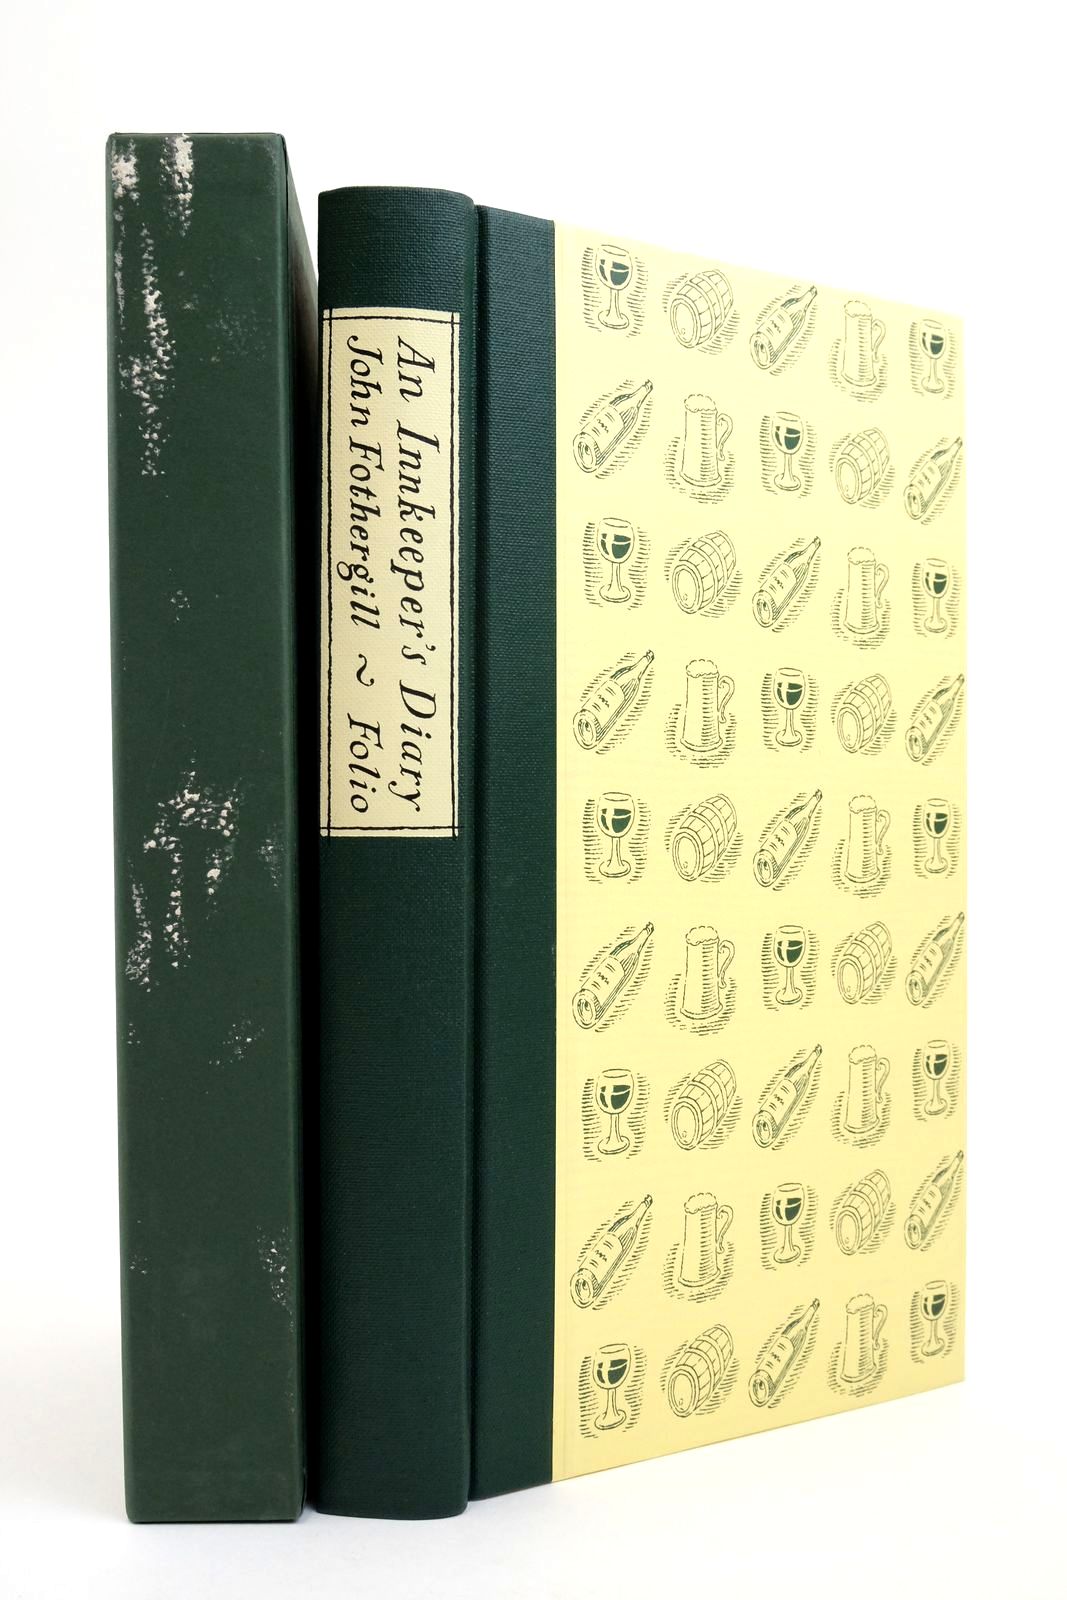 Photo of AN INNKEEPER'S DIARY written by Fothergill, John illustrated by Bailey, Peter published by Folio Society (STOCK CODE: 2138441)  for sale by Stella & Rose's Books